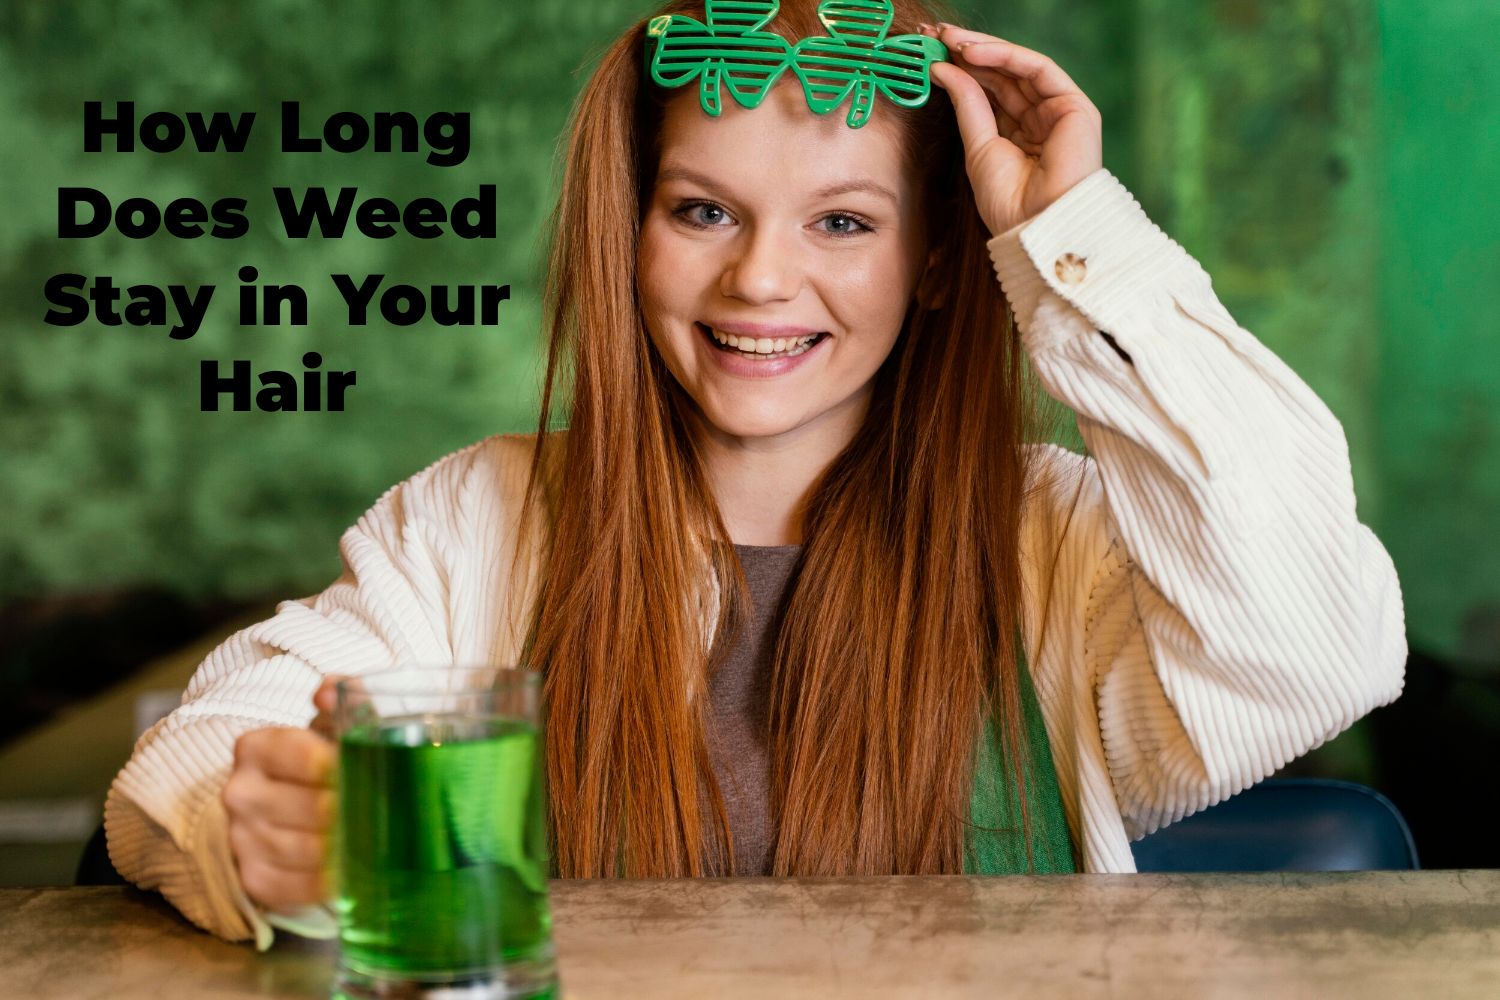 How Long Does Weed Stay in Your Hair